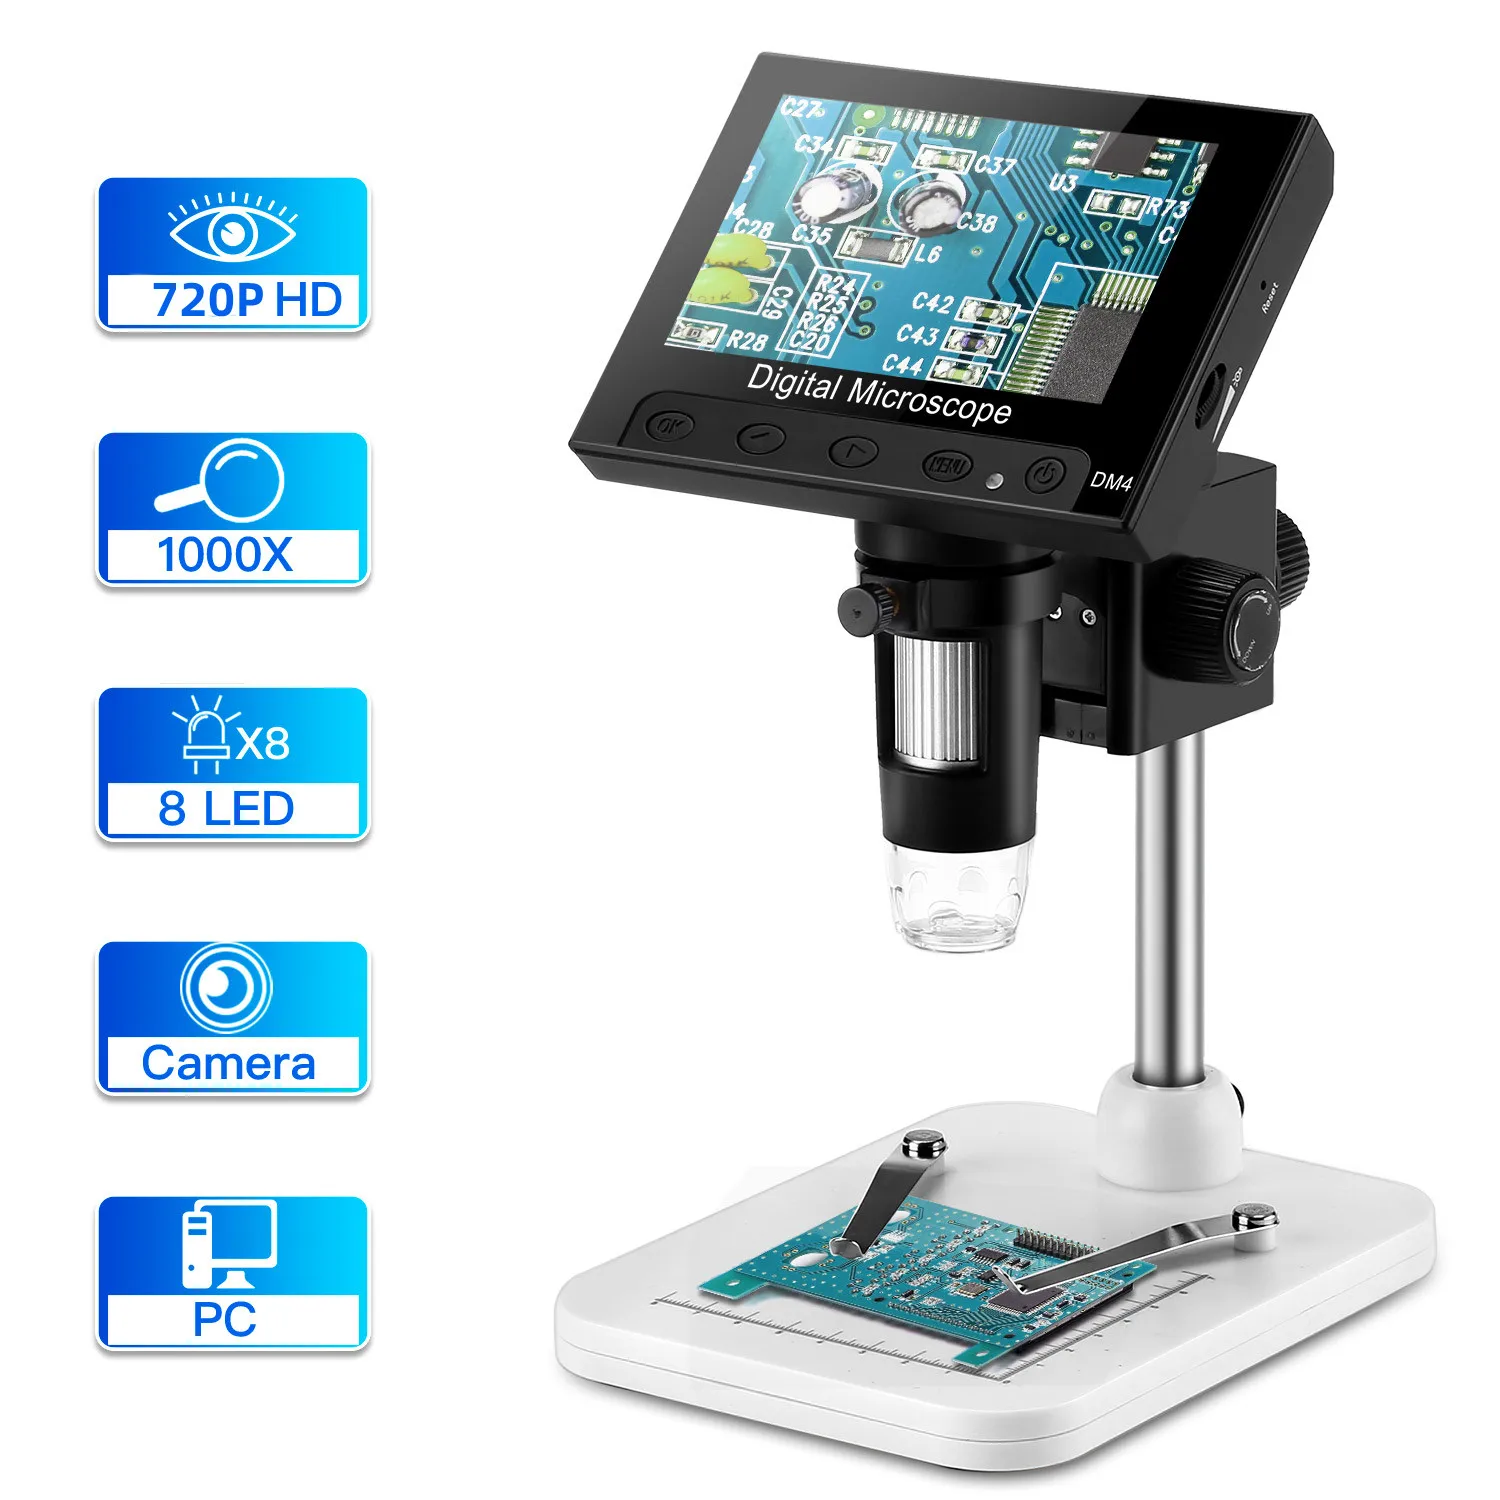 TOMLOV 7 LCD Digital Microscope with 32GB SD Card 1200x Magnification, 1080p Video Microscope with Metal Stand, 12mp